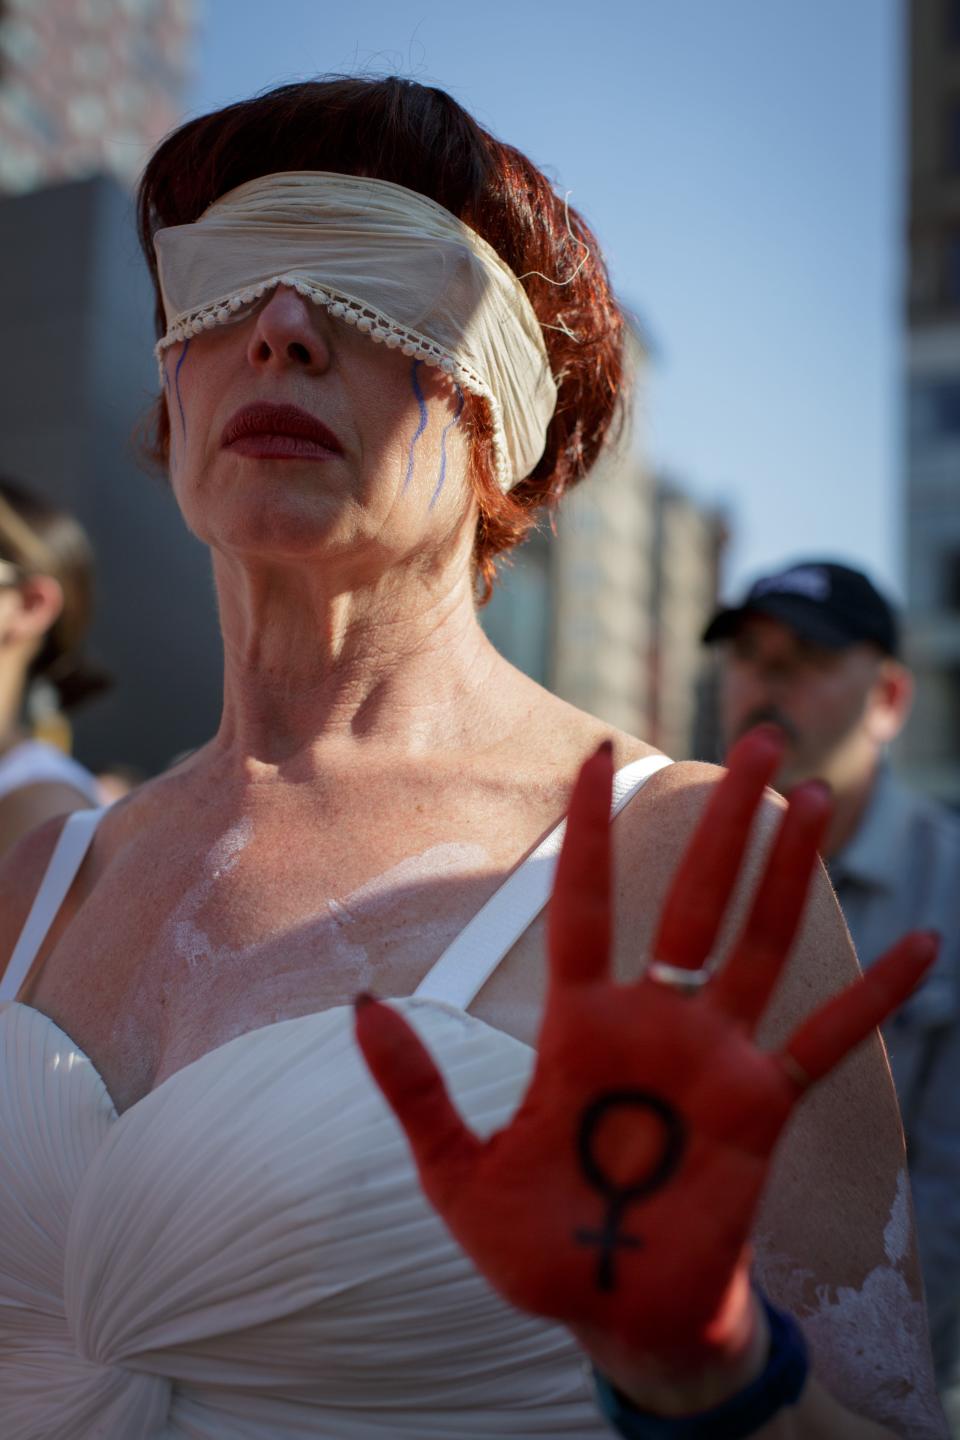 A woman wears a blindfold and displays her hand, painted red.